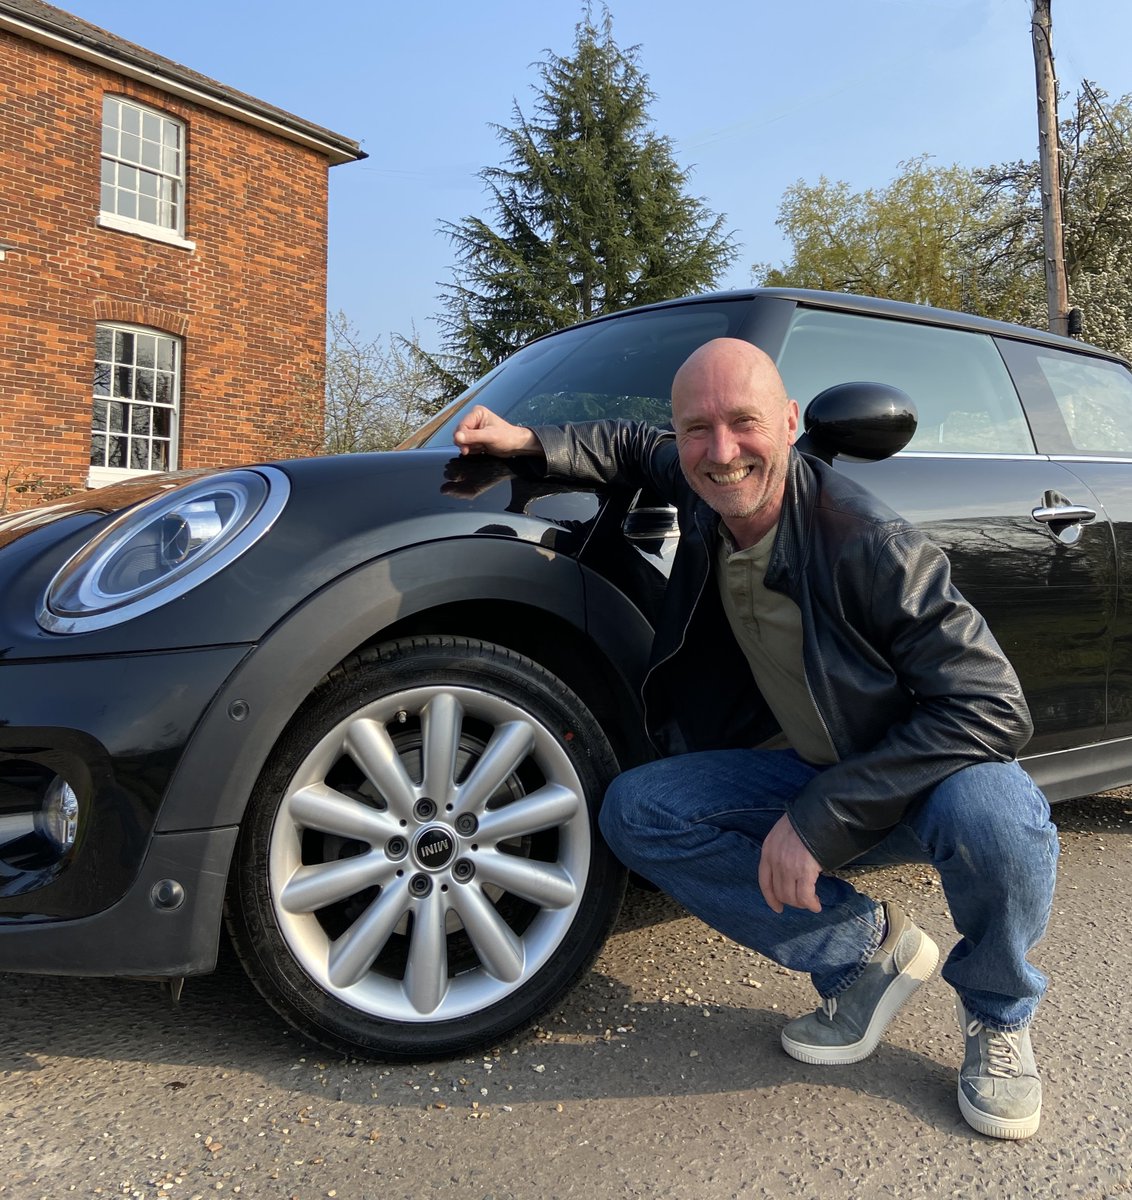 From the racetrack to the street… and my driveway! Thanks to my friends at Giti for my GitiControl 288 tyres  #enjoydriving #newtyres #gititire #perrymccarthy #originalstig #endorsement #protyre